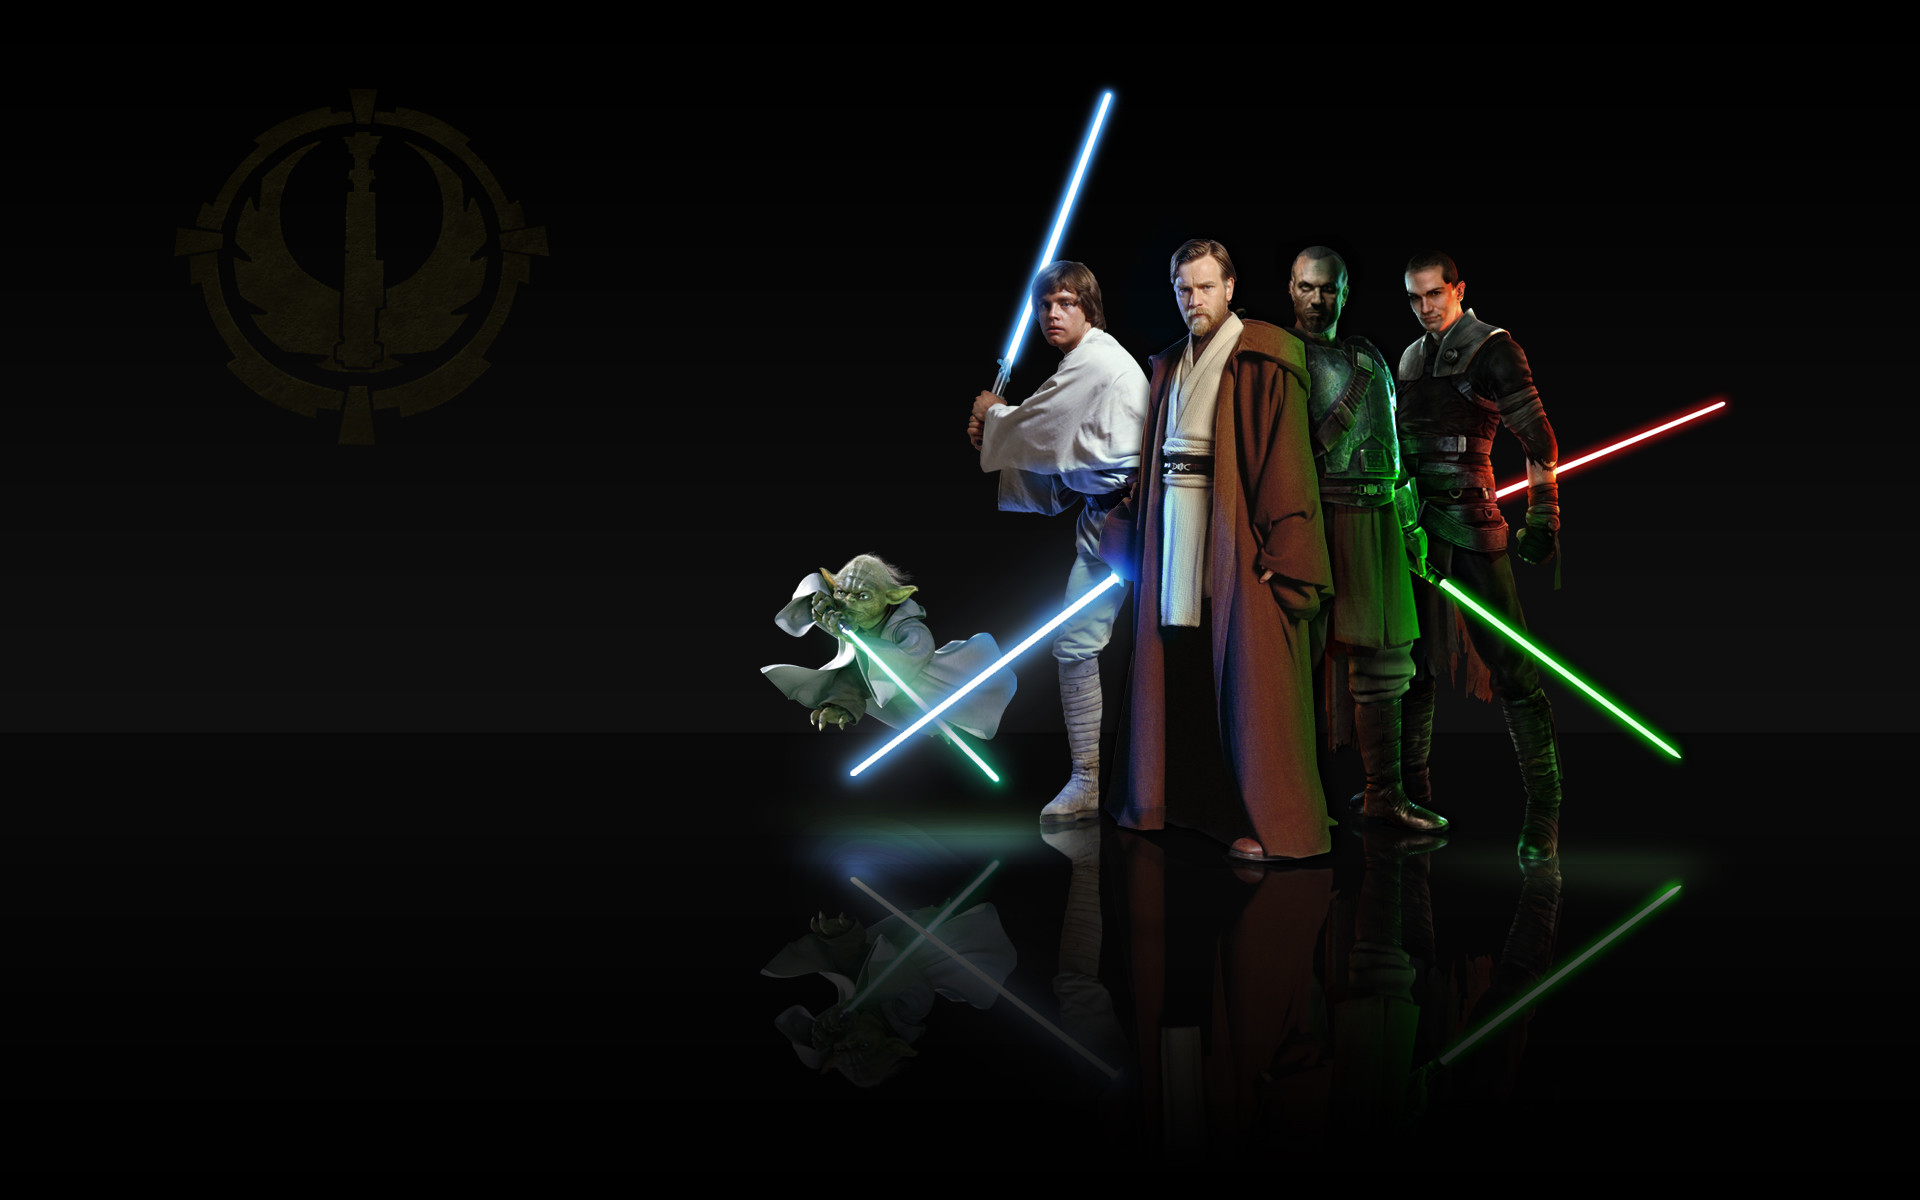 1920x1200 Quick Wallpaper during my break, of my favorite Jedi's. Can't really find  any cool wallpaper of Star Wars, so if you have a large sc.